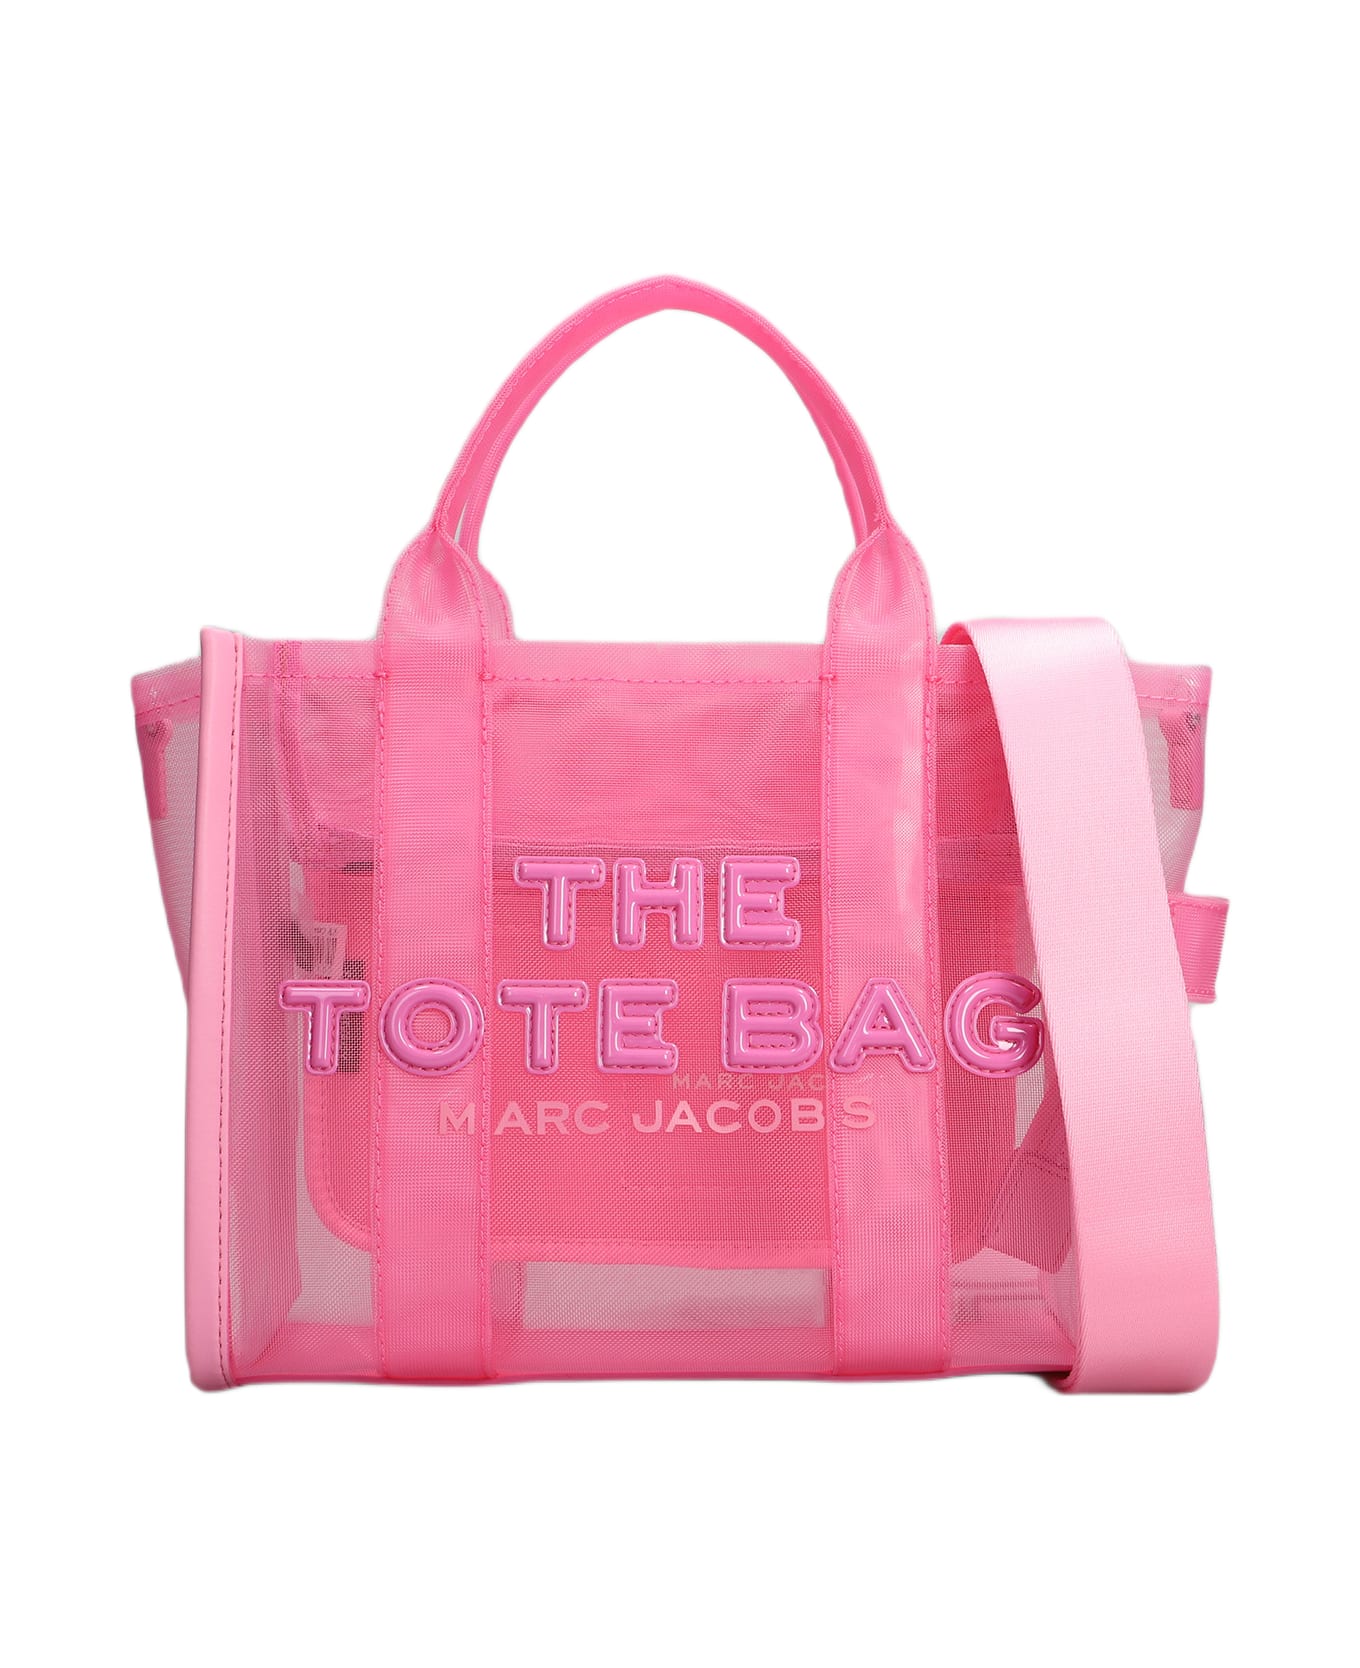 Marc Jacobs The Small Tote Nylon Bag - Candy pink